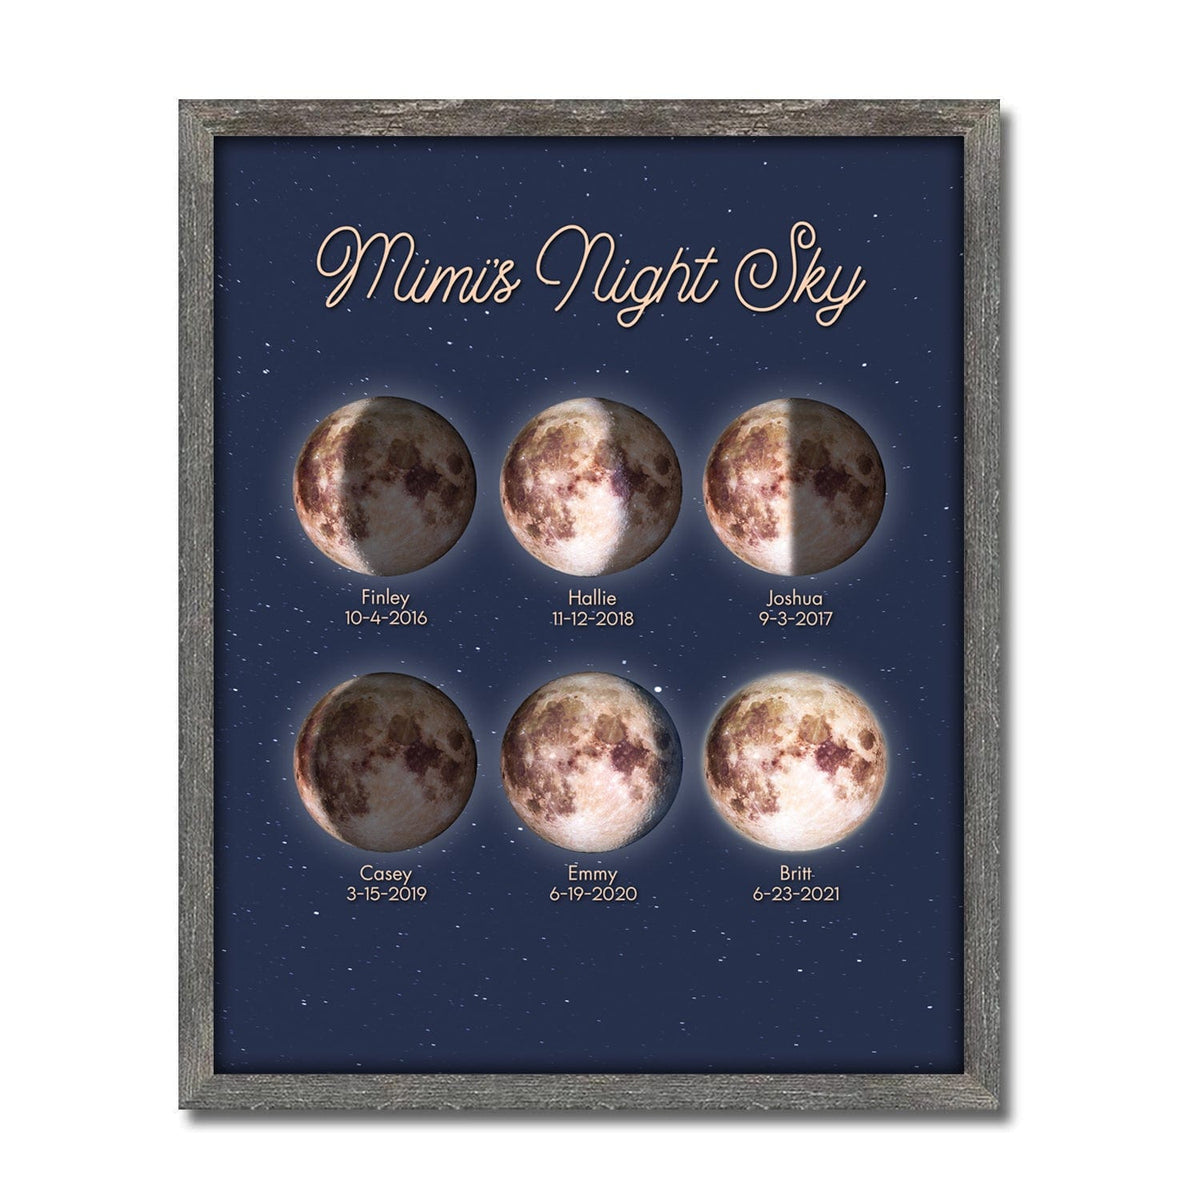 Framed Canvas finish for the mom and children night sky art, framed with a beautiful barnwood frame